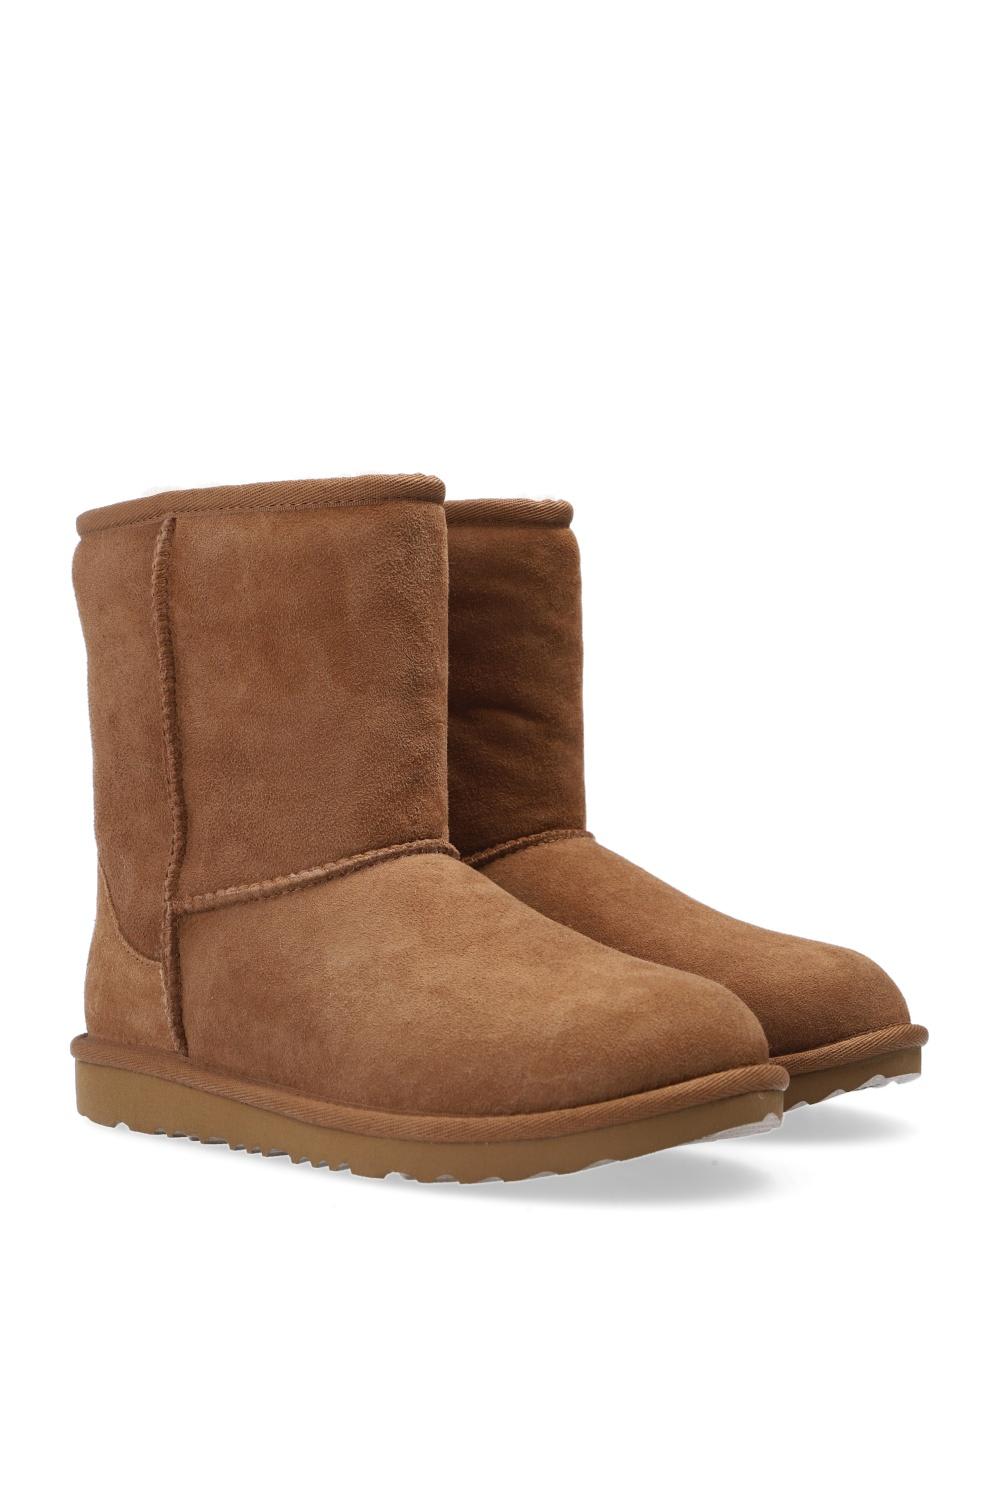 Shop Ugg Classic Ii Suede Snow Boots In Marrone